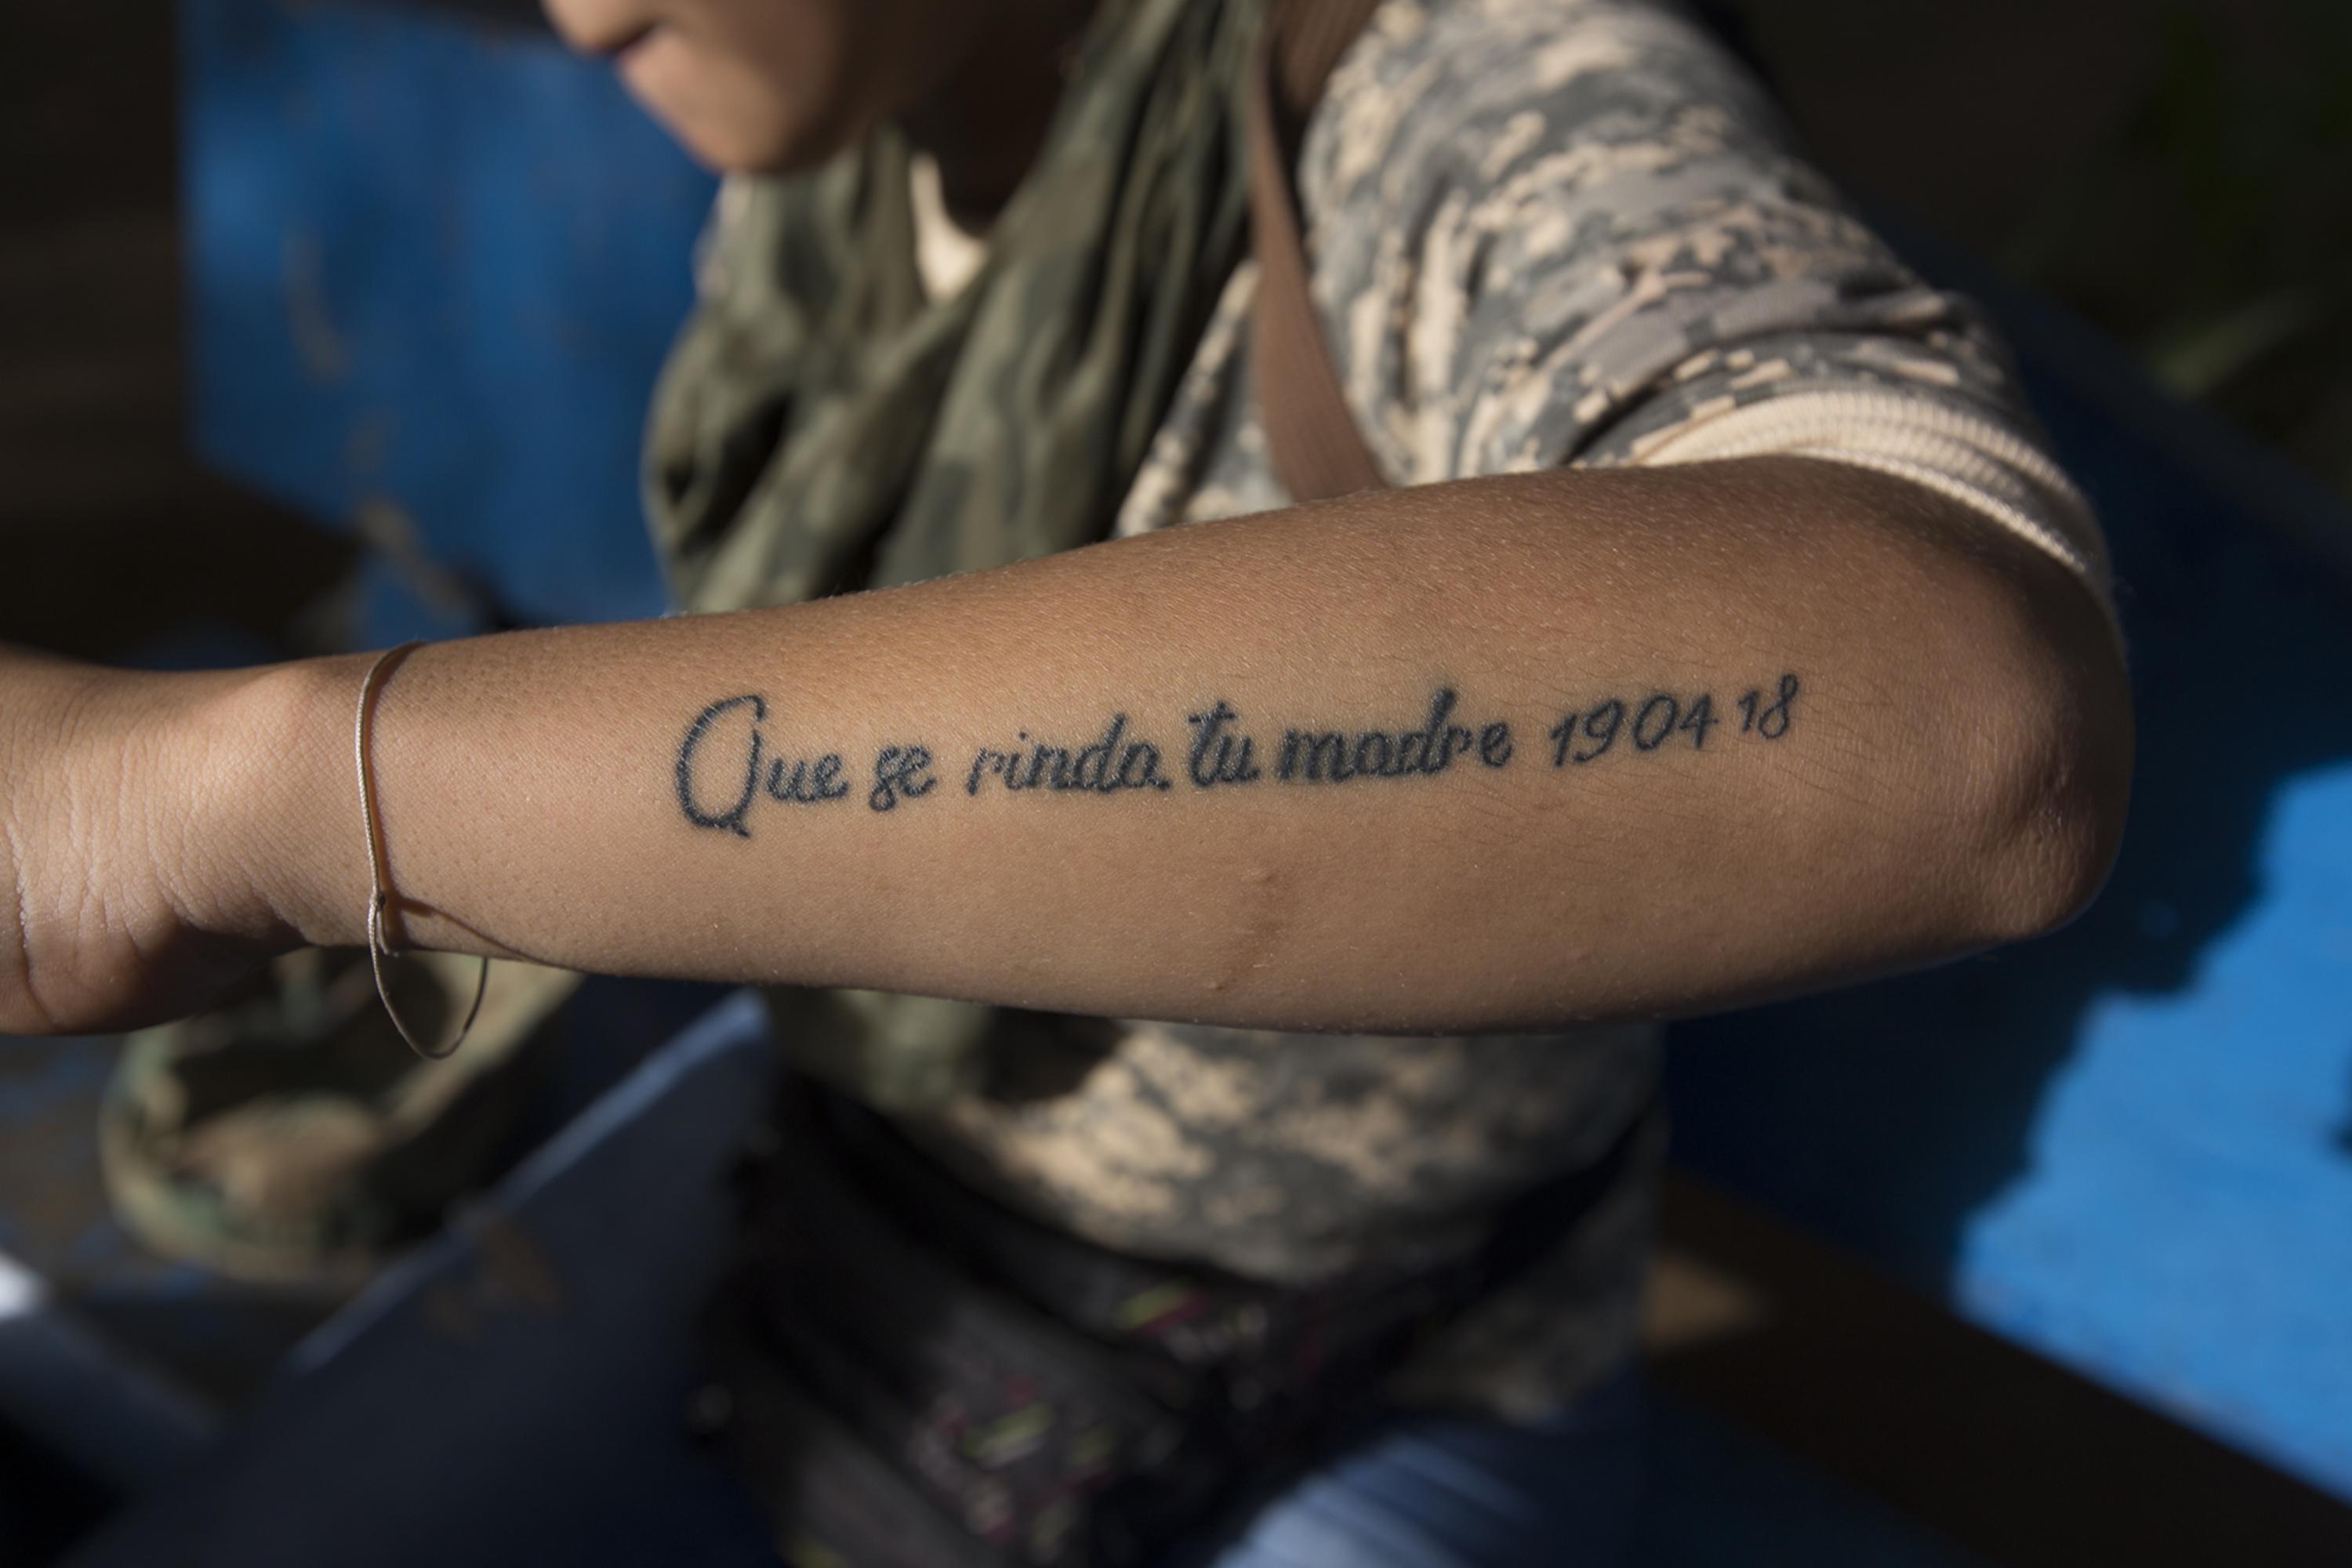 Chela, a member of the student resistance movement, shows the tattoo she got the day that her cousin, Shester, was killed by police and paramilitaries attacking the UNAN occupation, on June 7, 2018. Photo Fred Ramos